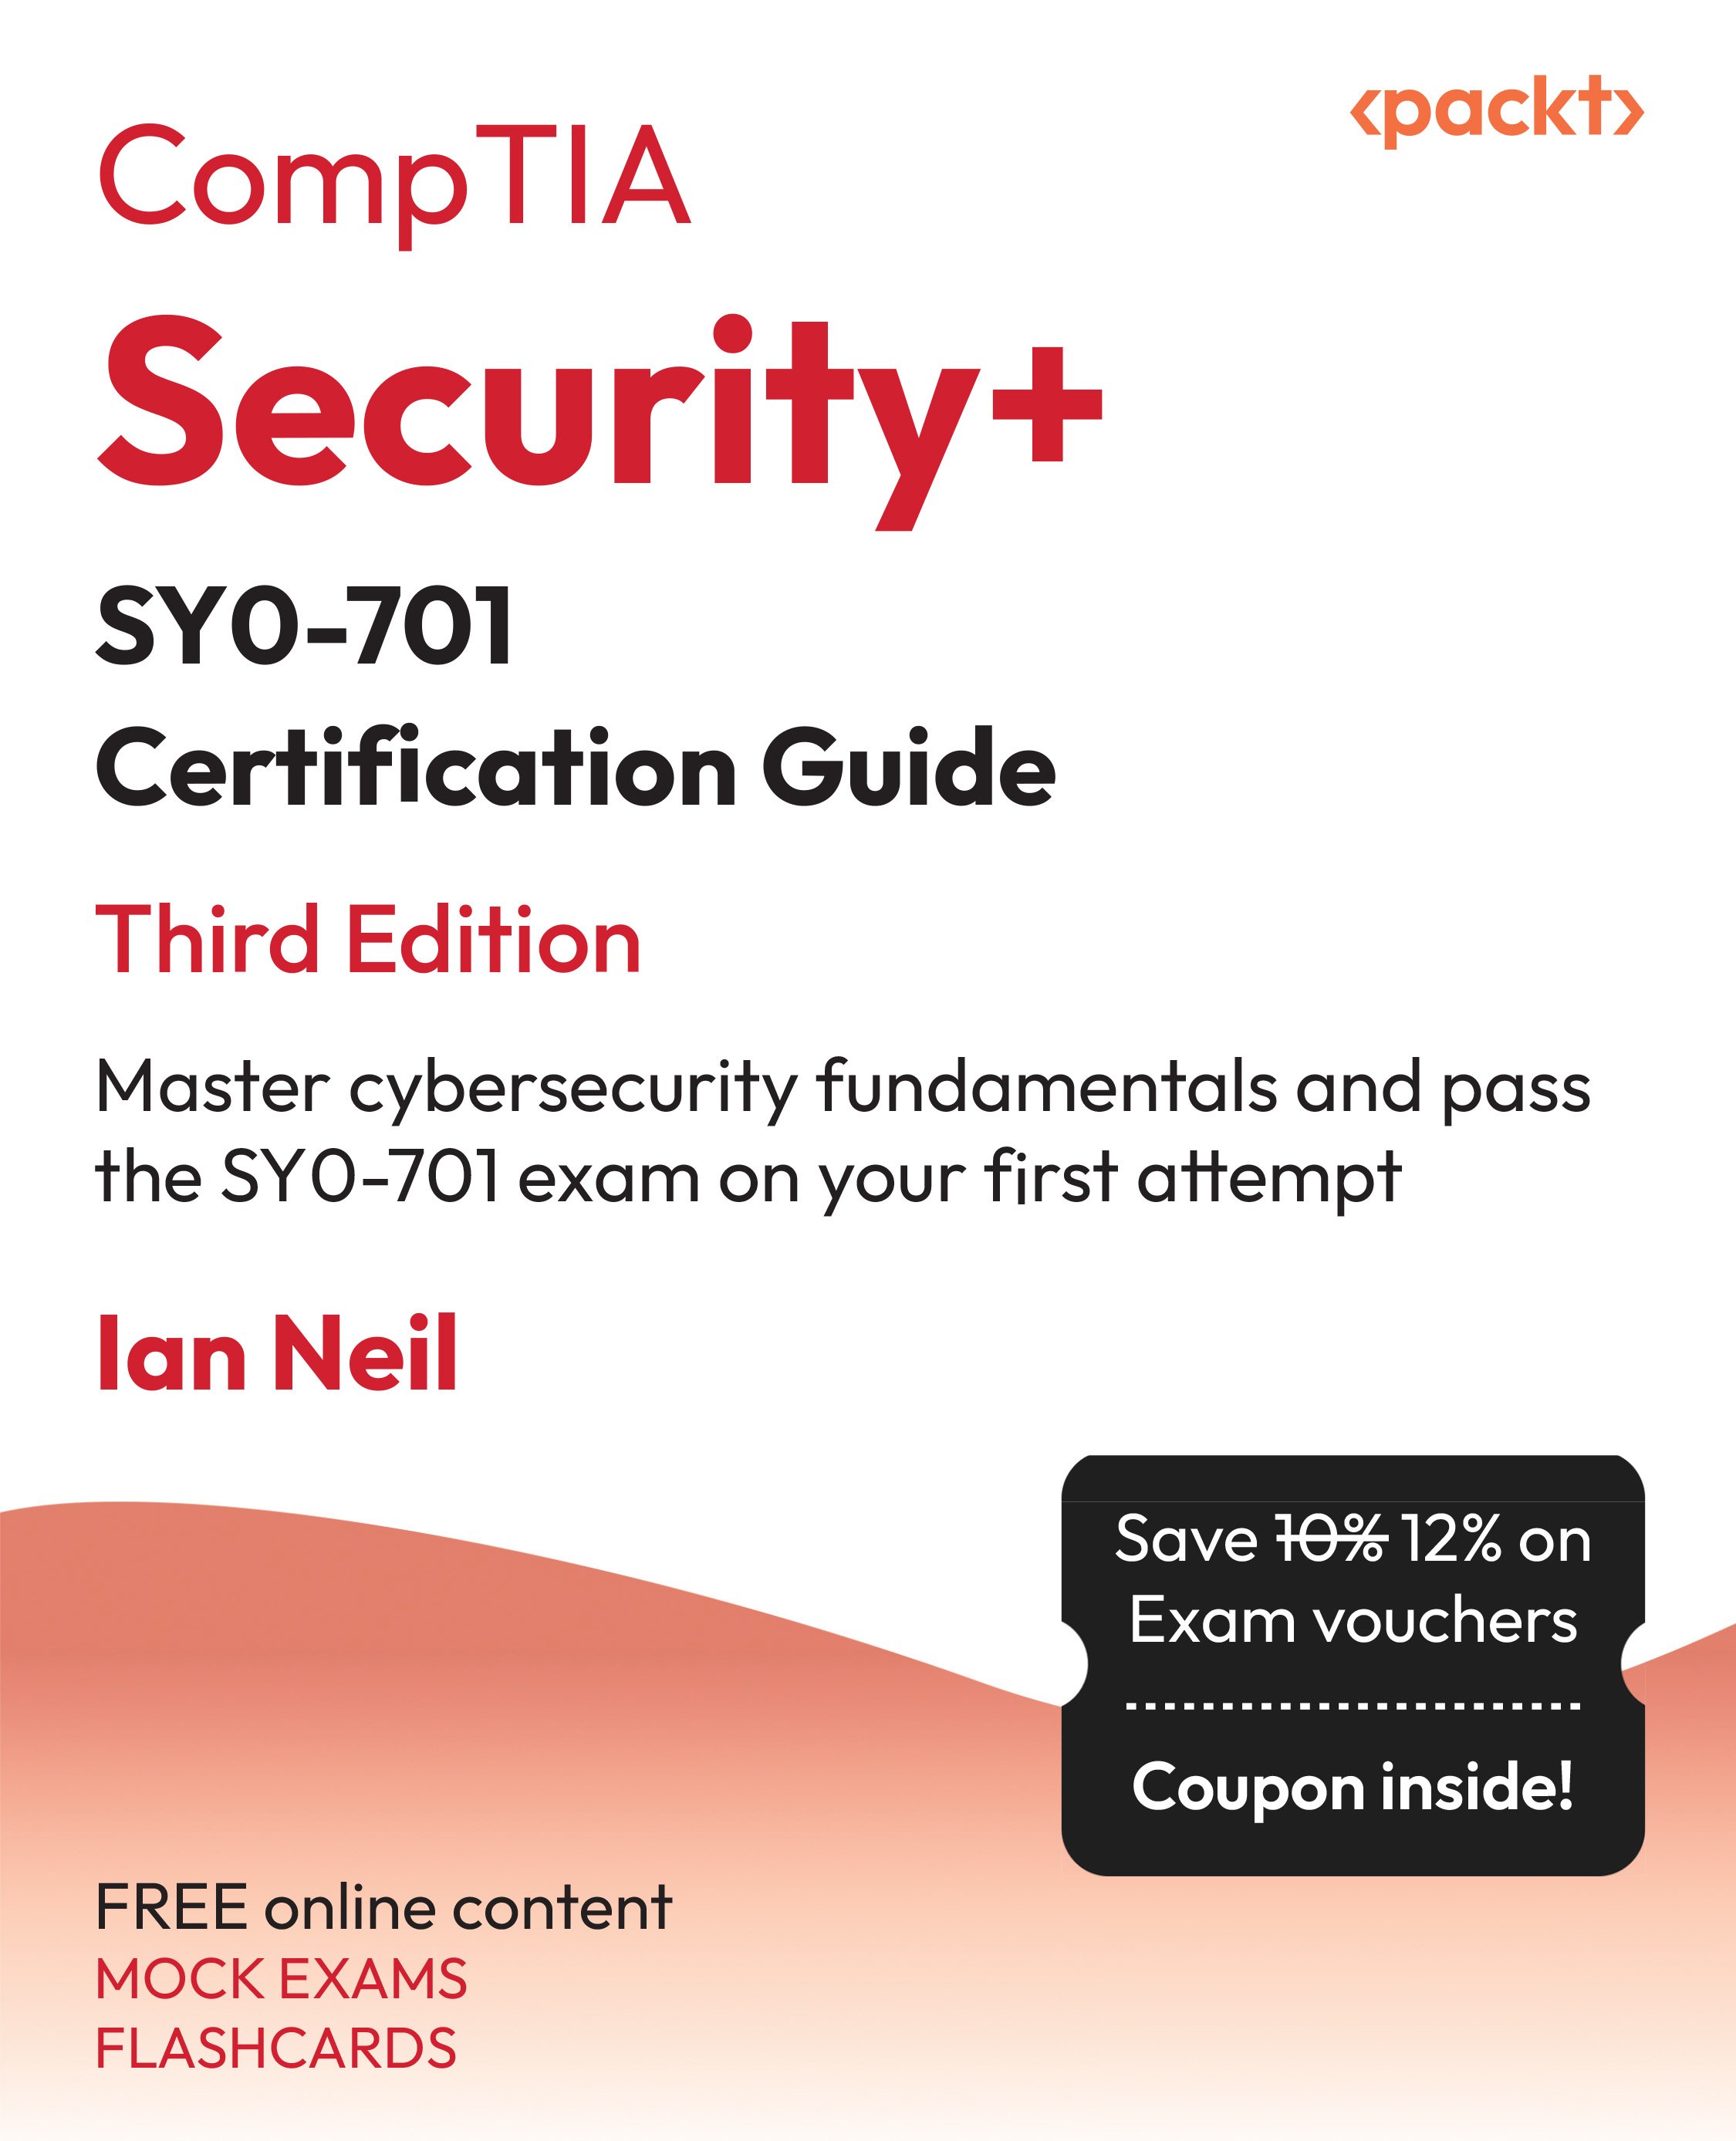 CompTIA Security+ SY0-701 Certification Guide: Master cybersecurity fundamentals and pass the SY0-701 exam on your first attempt, Third Edition